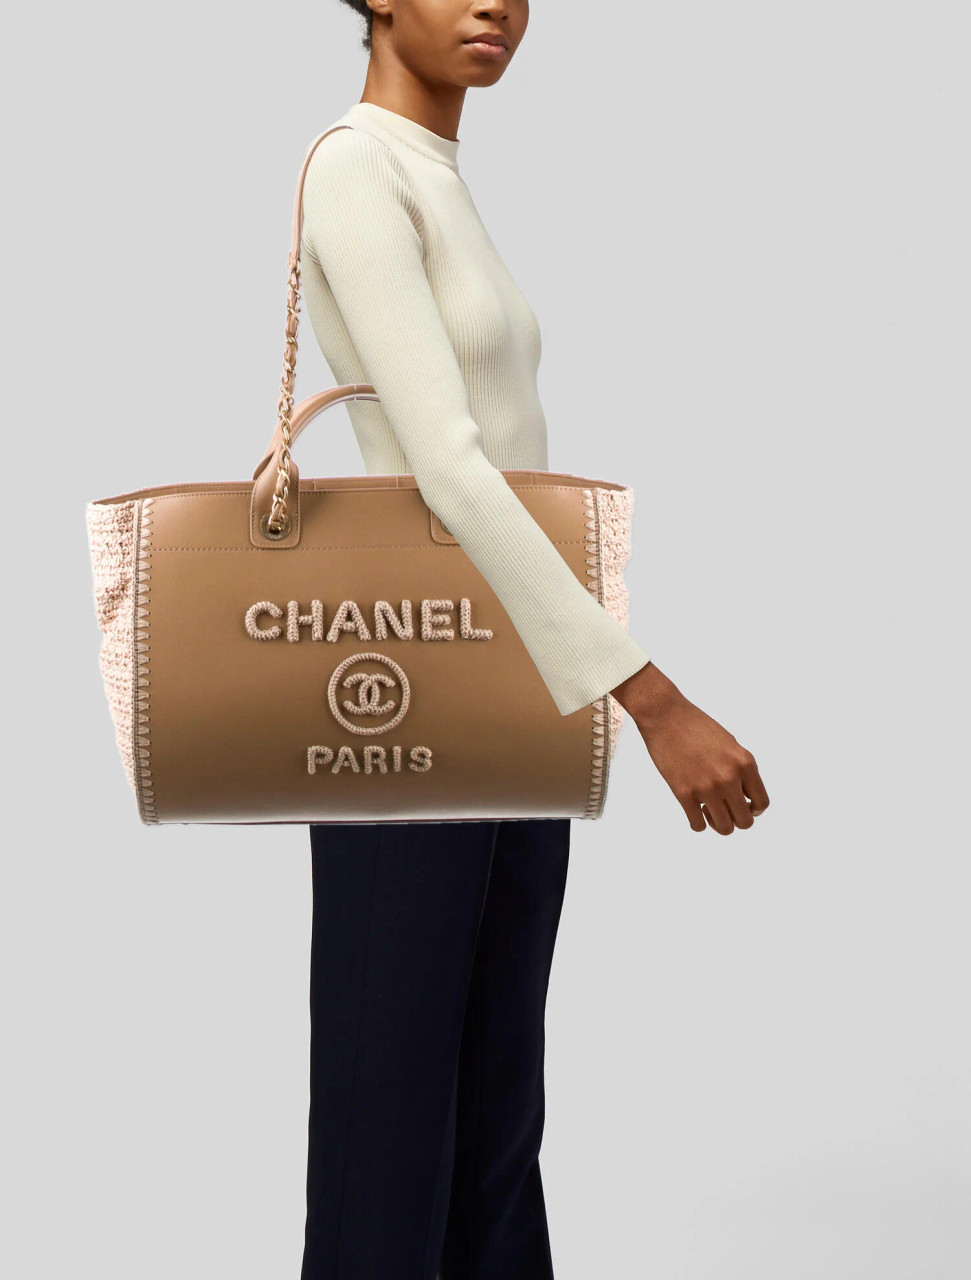 Chanel's second-hand shopping basket bag sells for Rs 86 lakh